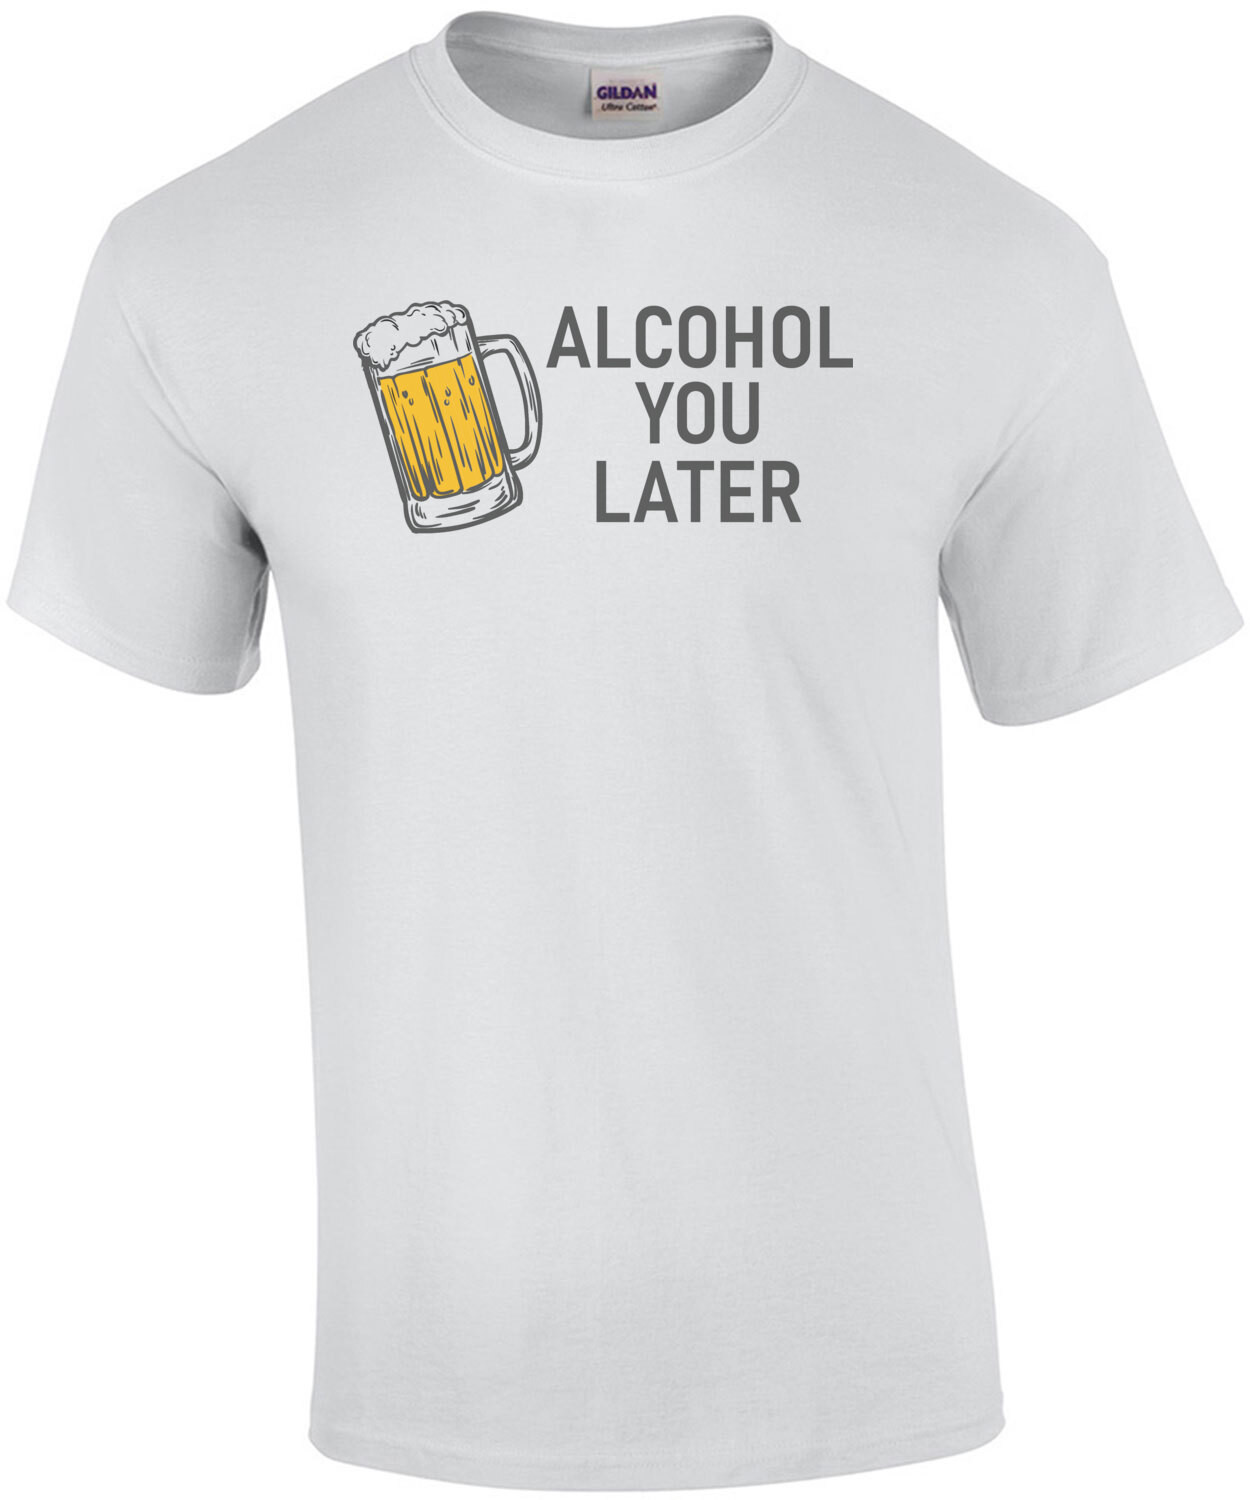 Alcohol You Later - funny beer drinking t-shirt